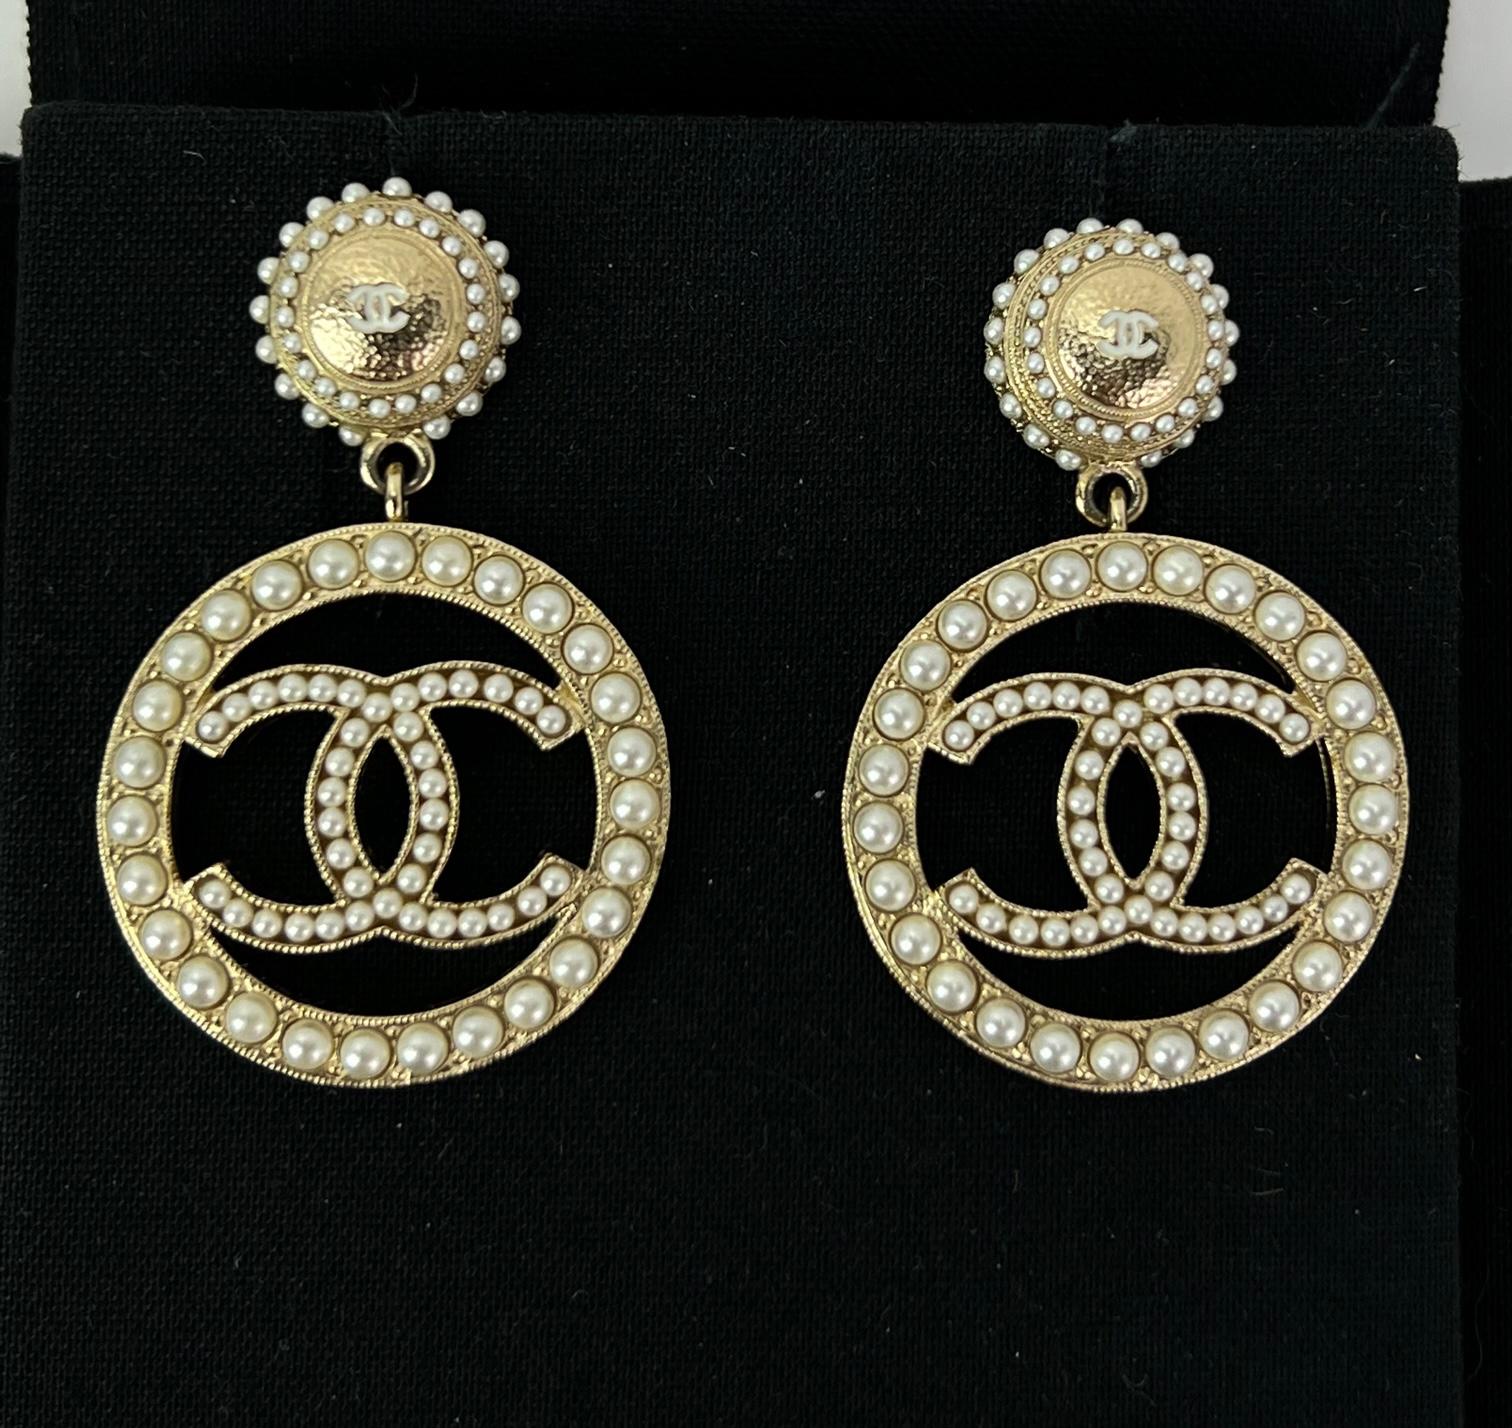 Pre-Owned 100% Authentic
CHANEL Earrings Pearl CC Logo Drop Golden Earrings
RATING: A...excellent, near mint, only slight 
signs of wear
MATERIAL: fancy mini pearl beads, metal
MEASUREMENTS: H 1.75'' x W 1.3''
BACKS: has plastic ring on backs for